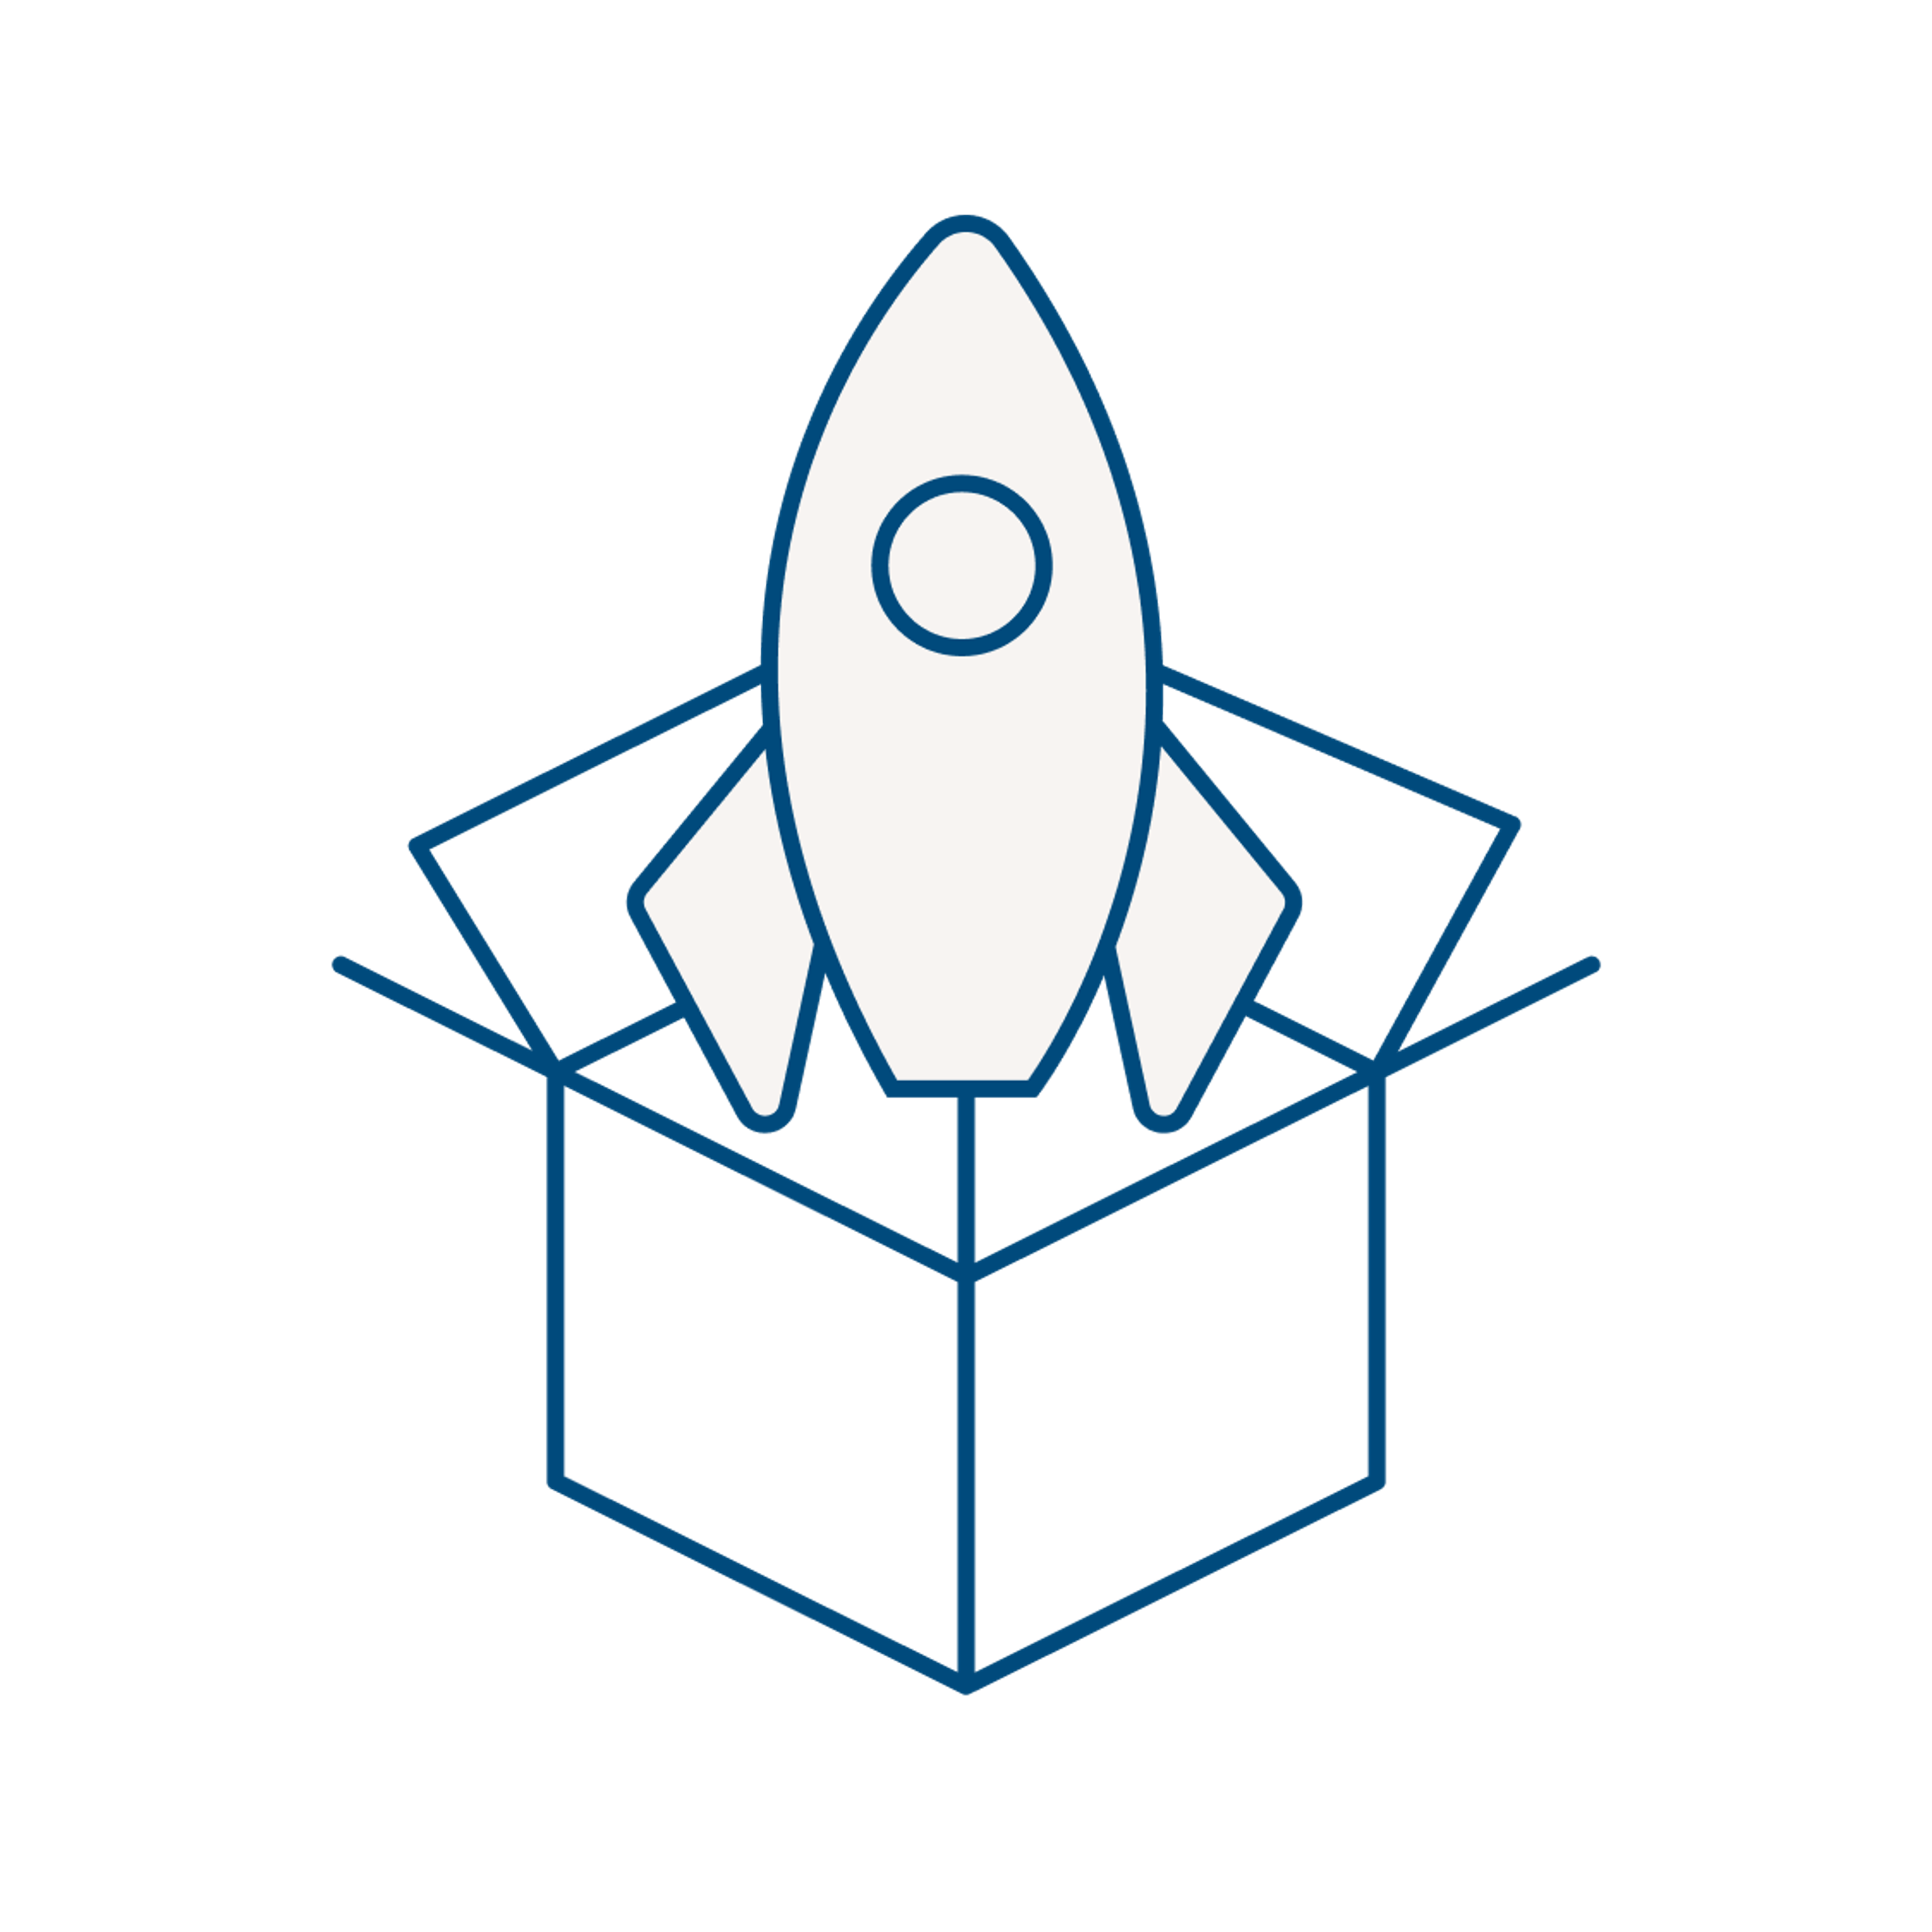 An icon depicting a rocket bursting out of a 3D box